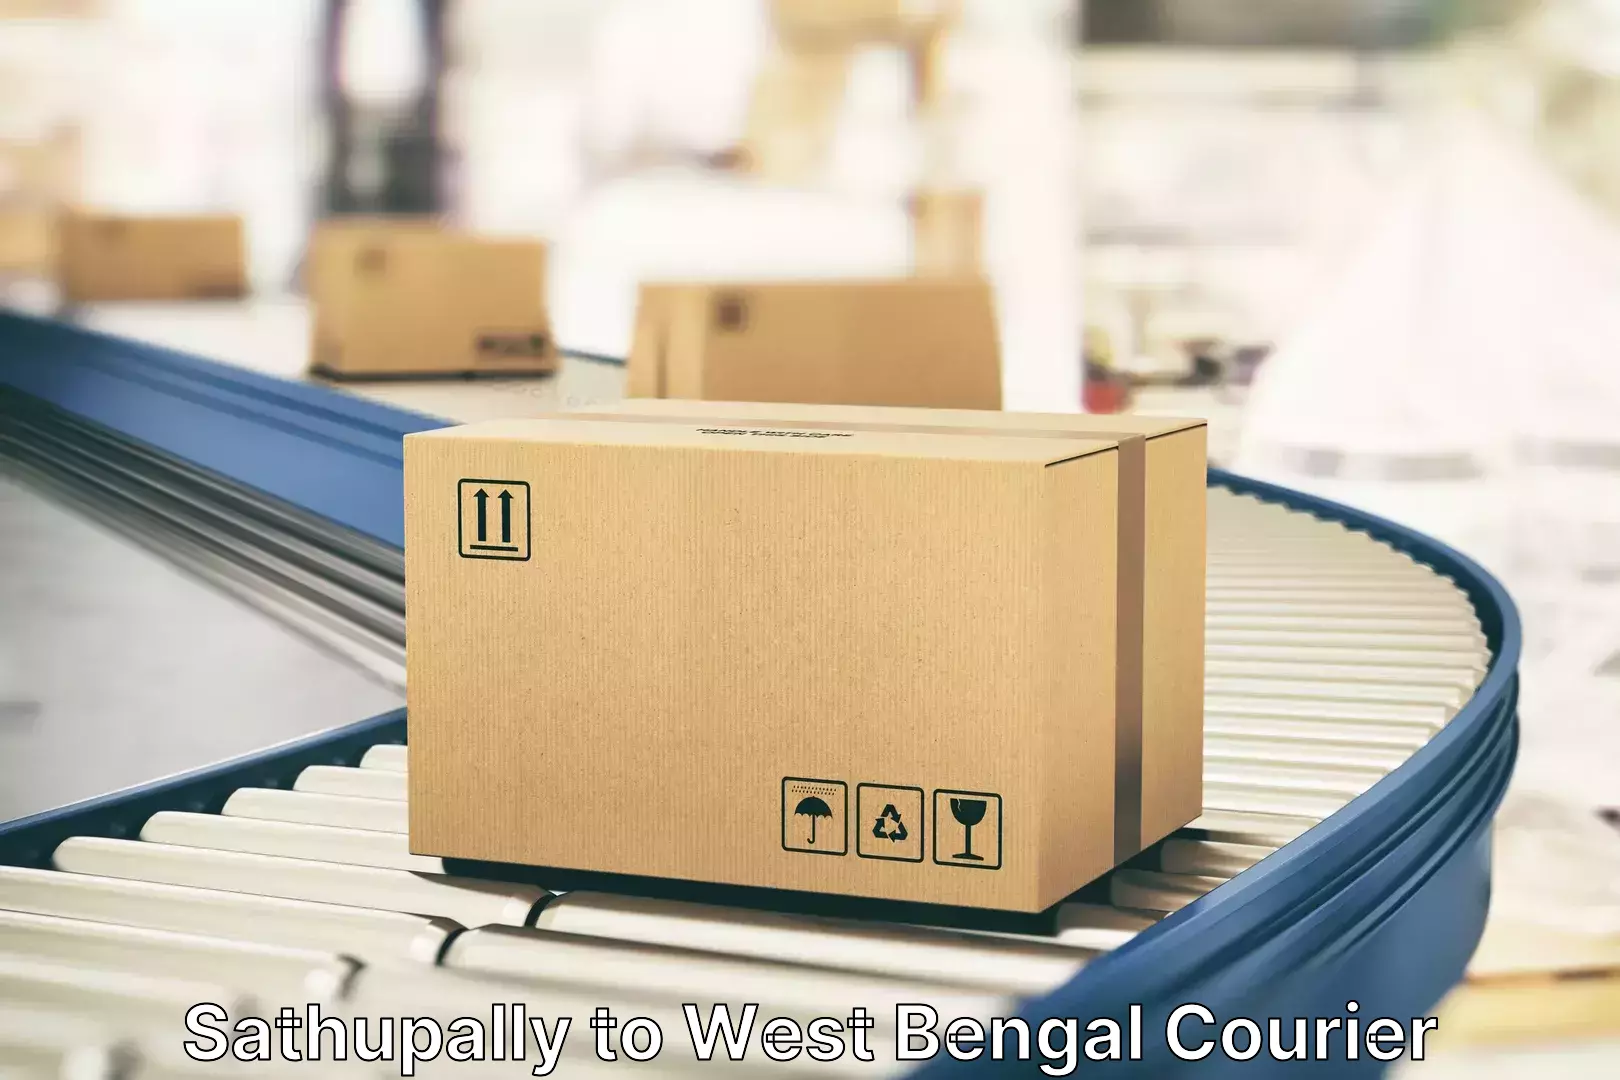 Luggage transport consultancy Sathupally to West Bengal